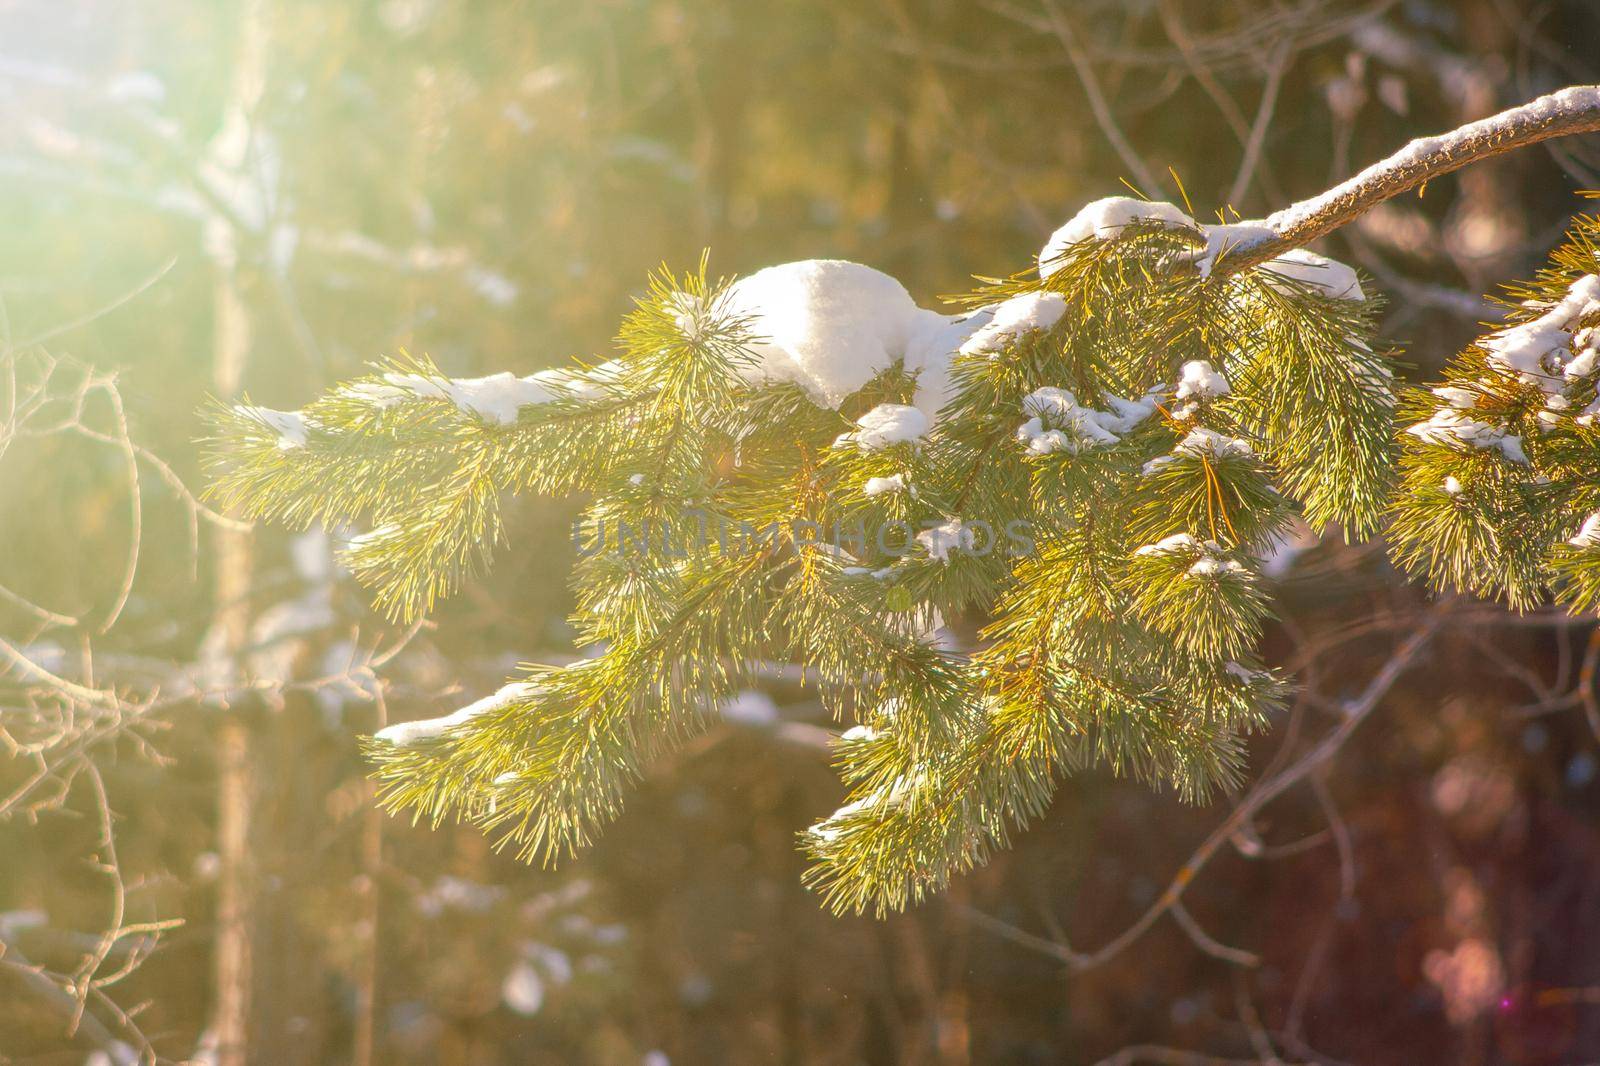 Pine tree branch in forest at sunny winter day with sunlight rays. Wintertime landscape in the woodland before Christmas holidays. Fir tree needles at snow